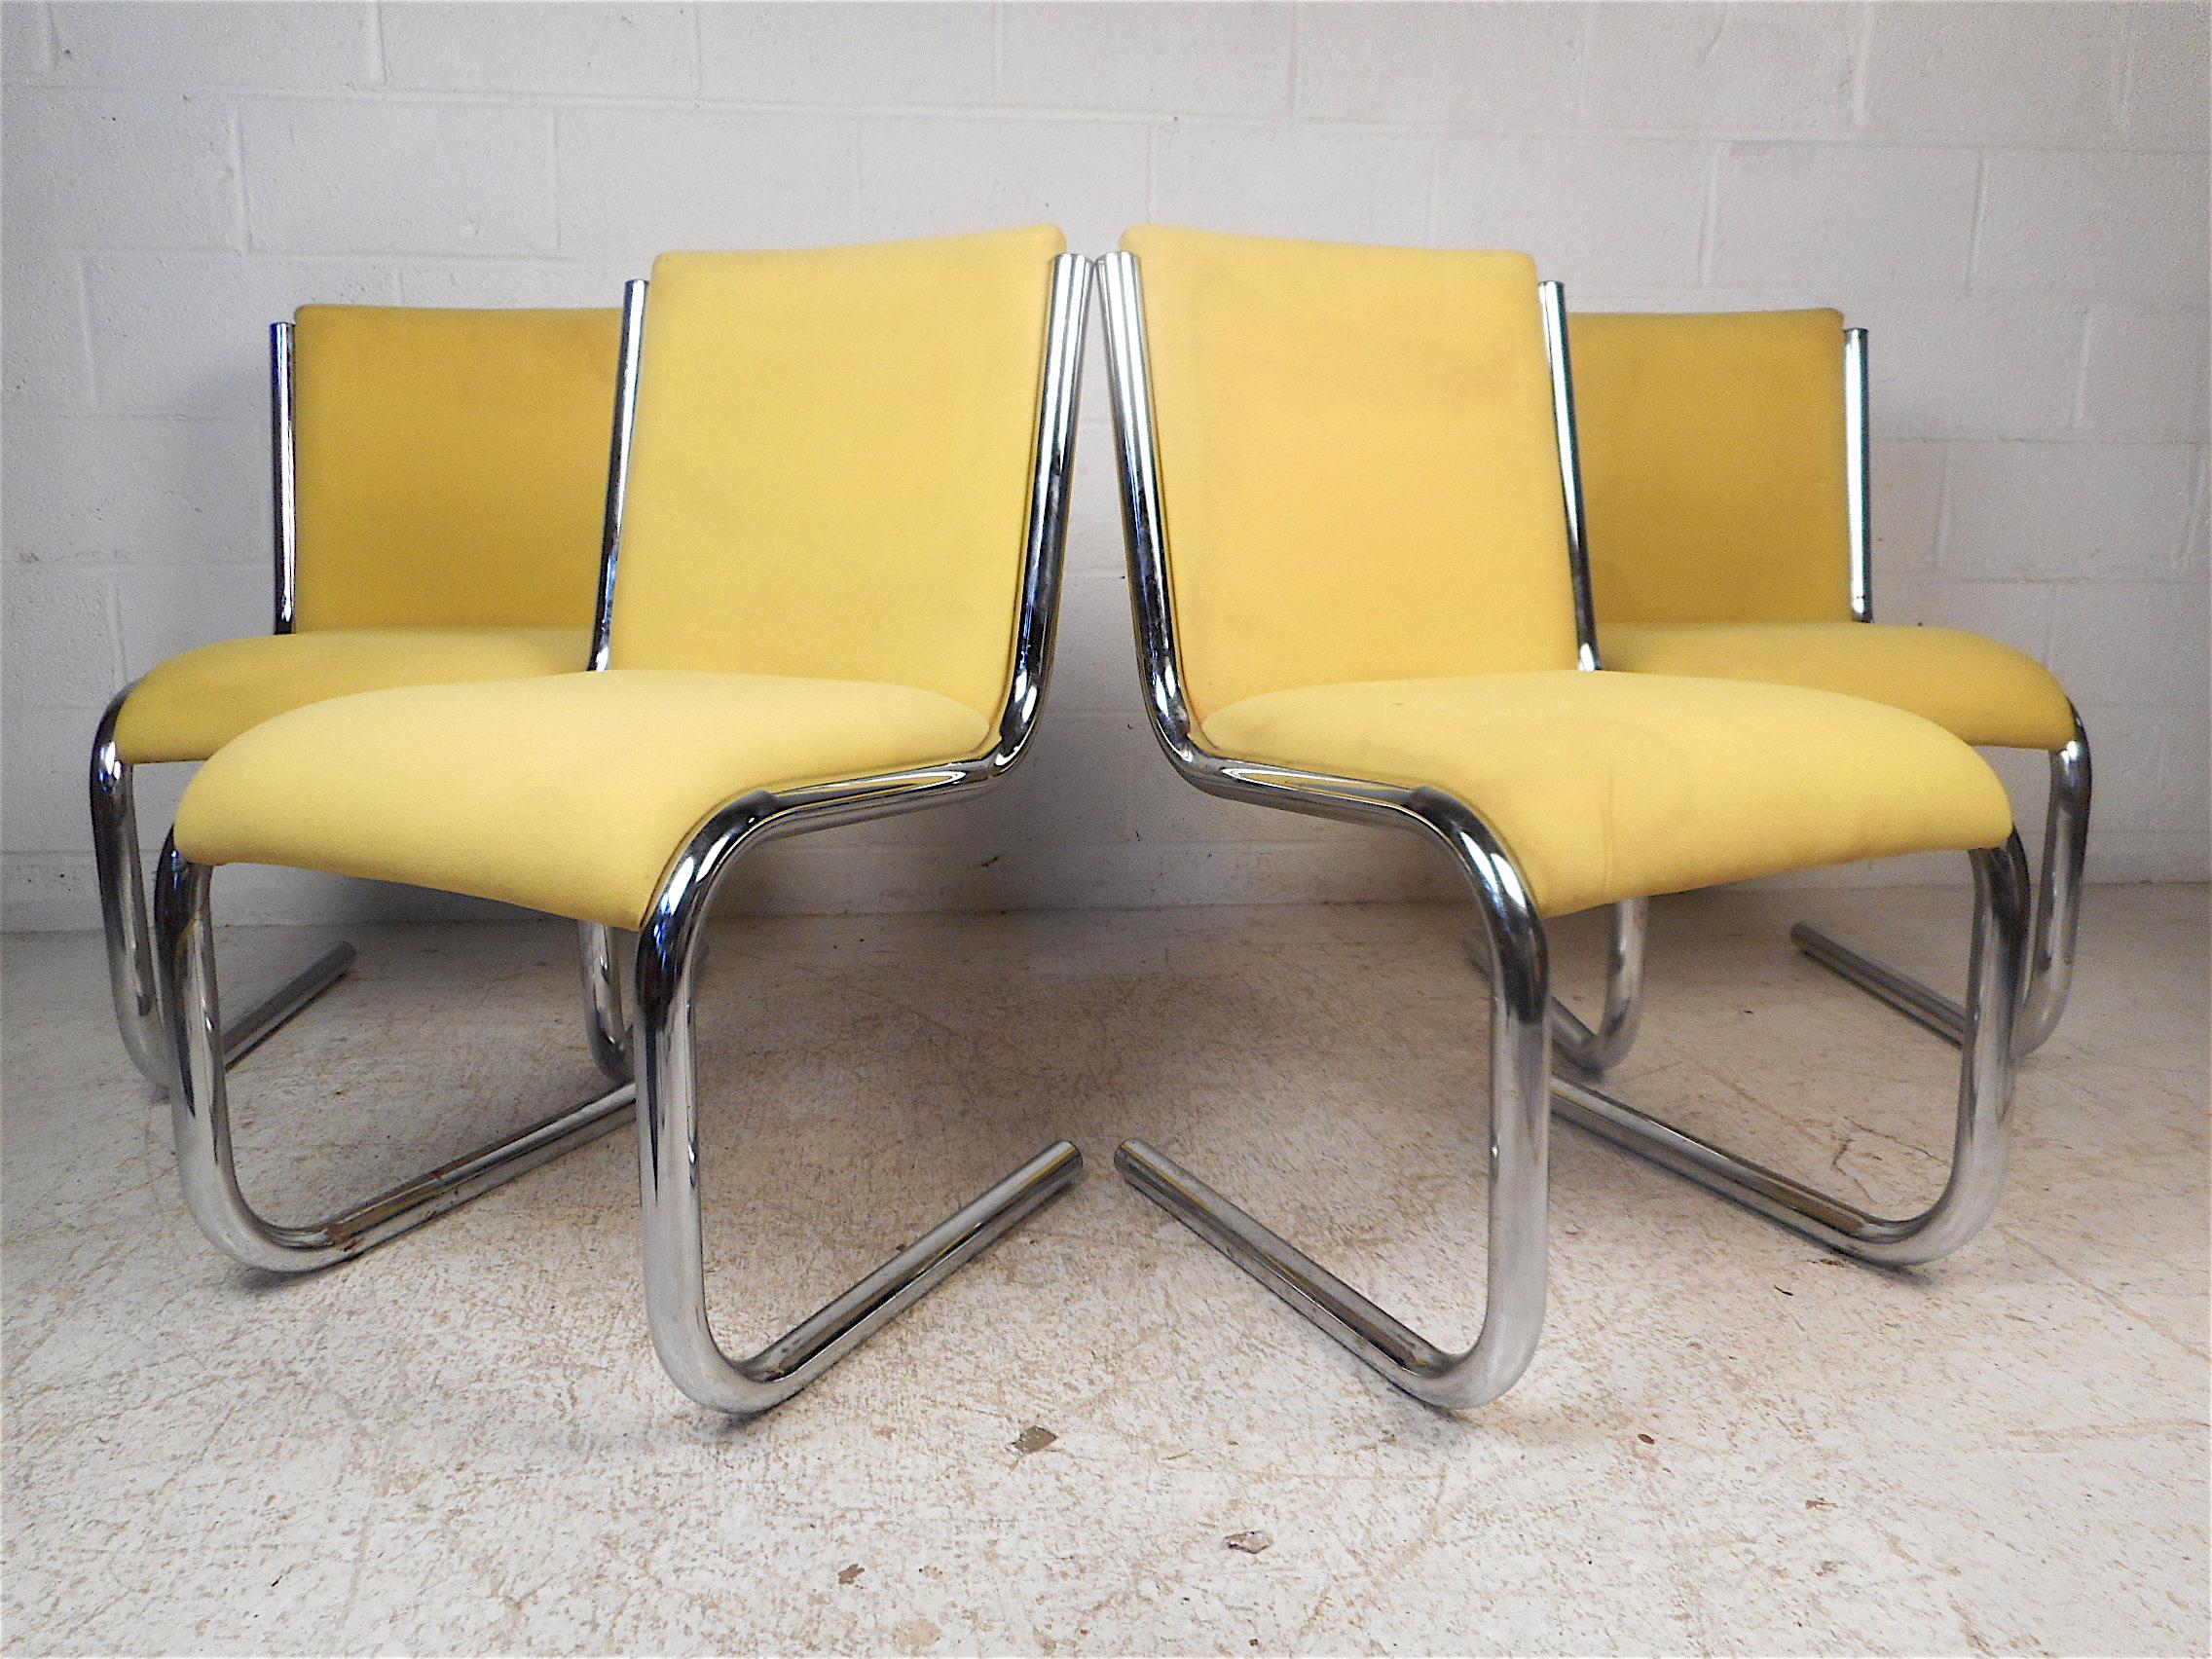 Stylish set of 4 midcentury chrome cantilevered chairs with vibrant yellow vintage upholstery. This set is sure to be a great addition to any modern interior. Please confirm item location with dealer (NJ or NY).